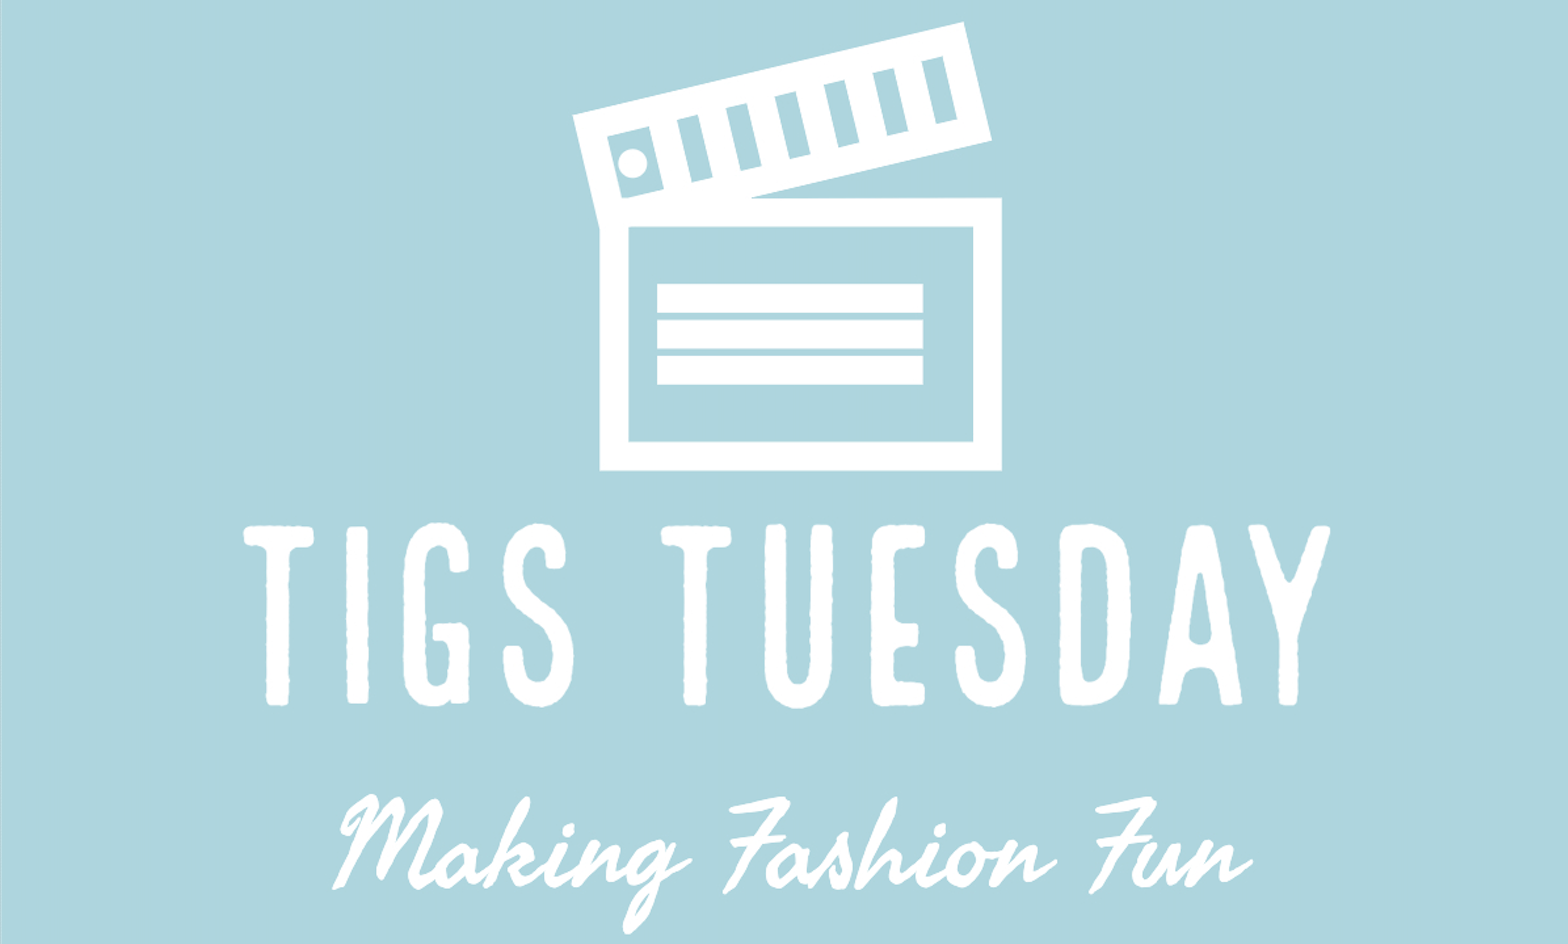 Load video: Tigs Tuesday Youtube video. A highlight of new products at Tigs